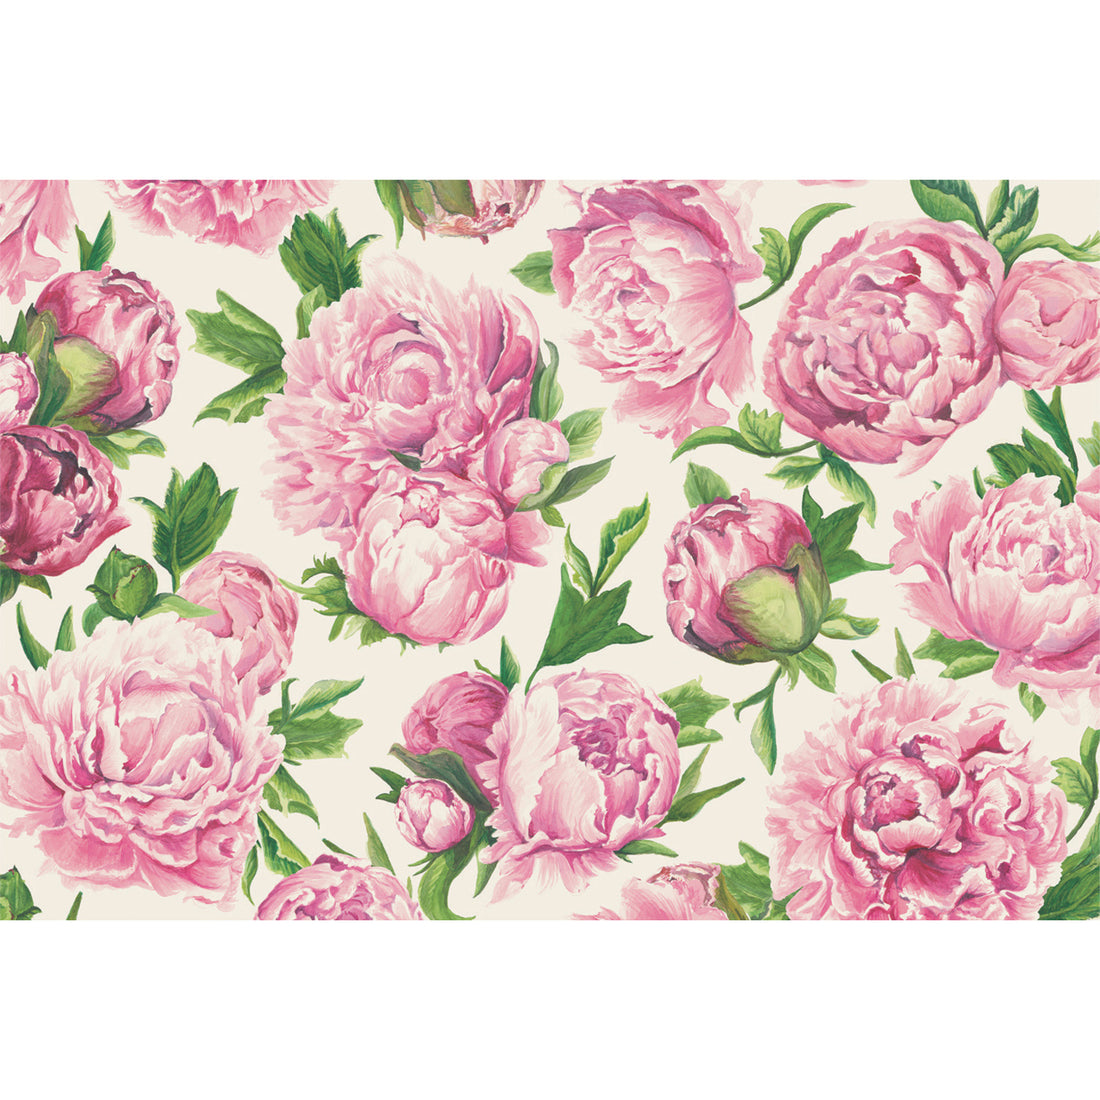 Large, pink, illustrated peony blooms with green leaves, scattered on a white background.